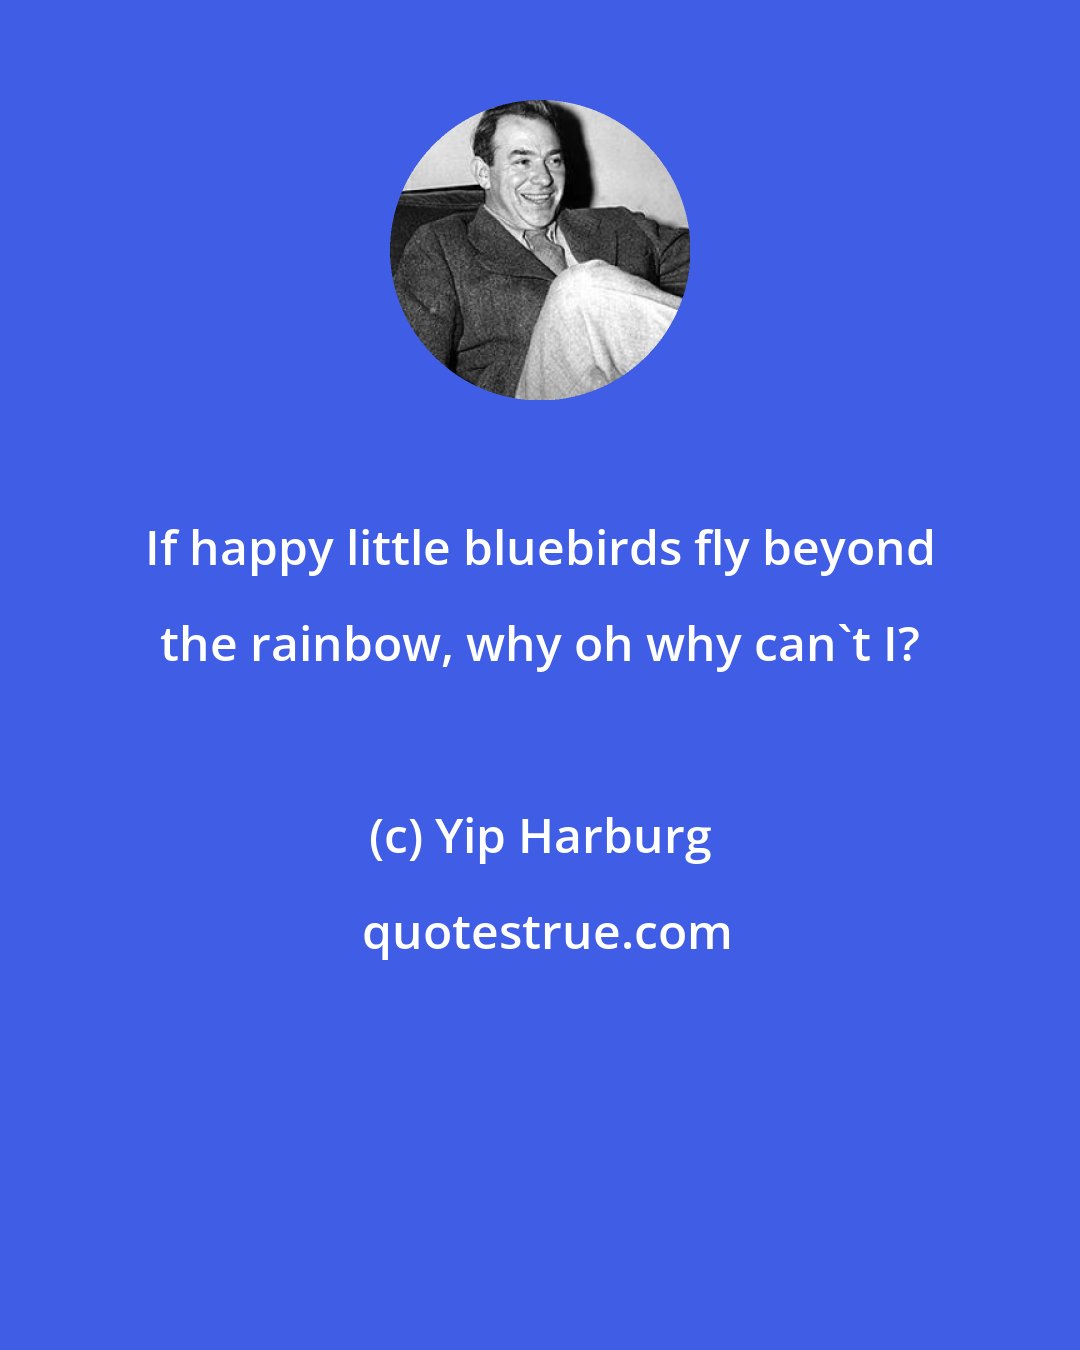 Yip Harburg: If happy little bluebirds fly beyond the rainbow, why oh why can't I?